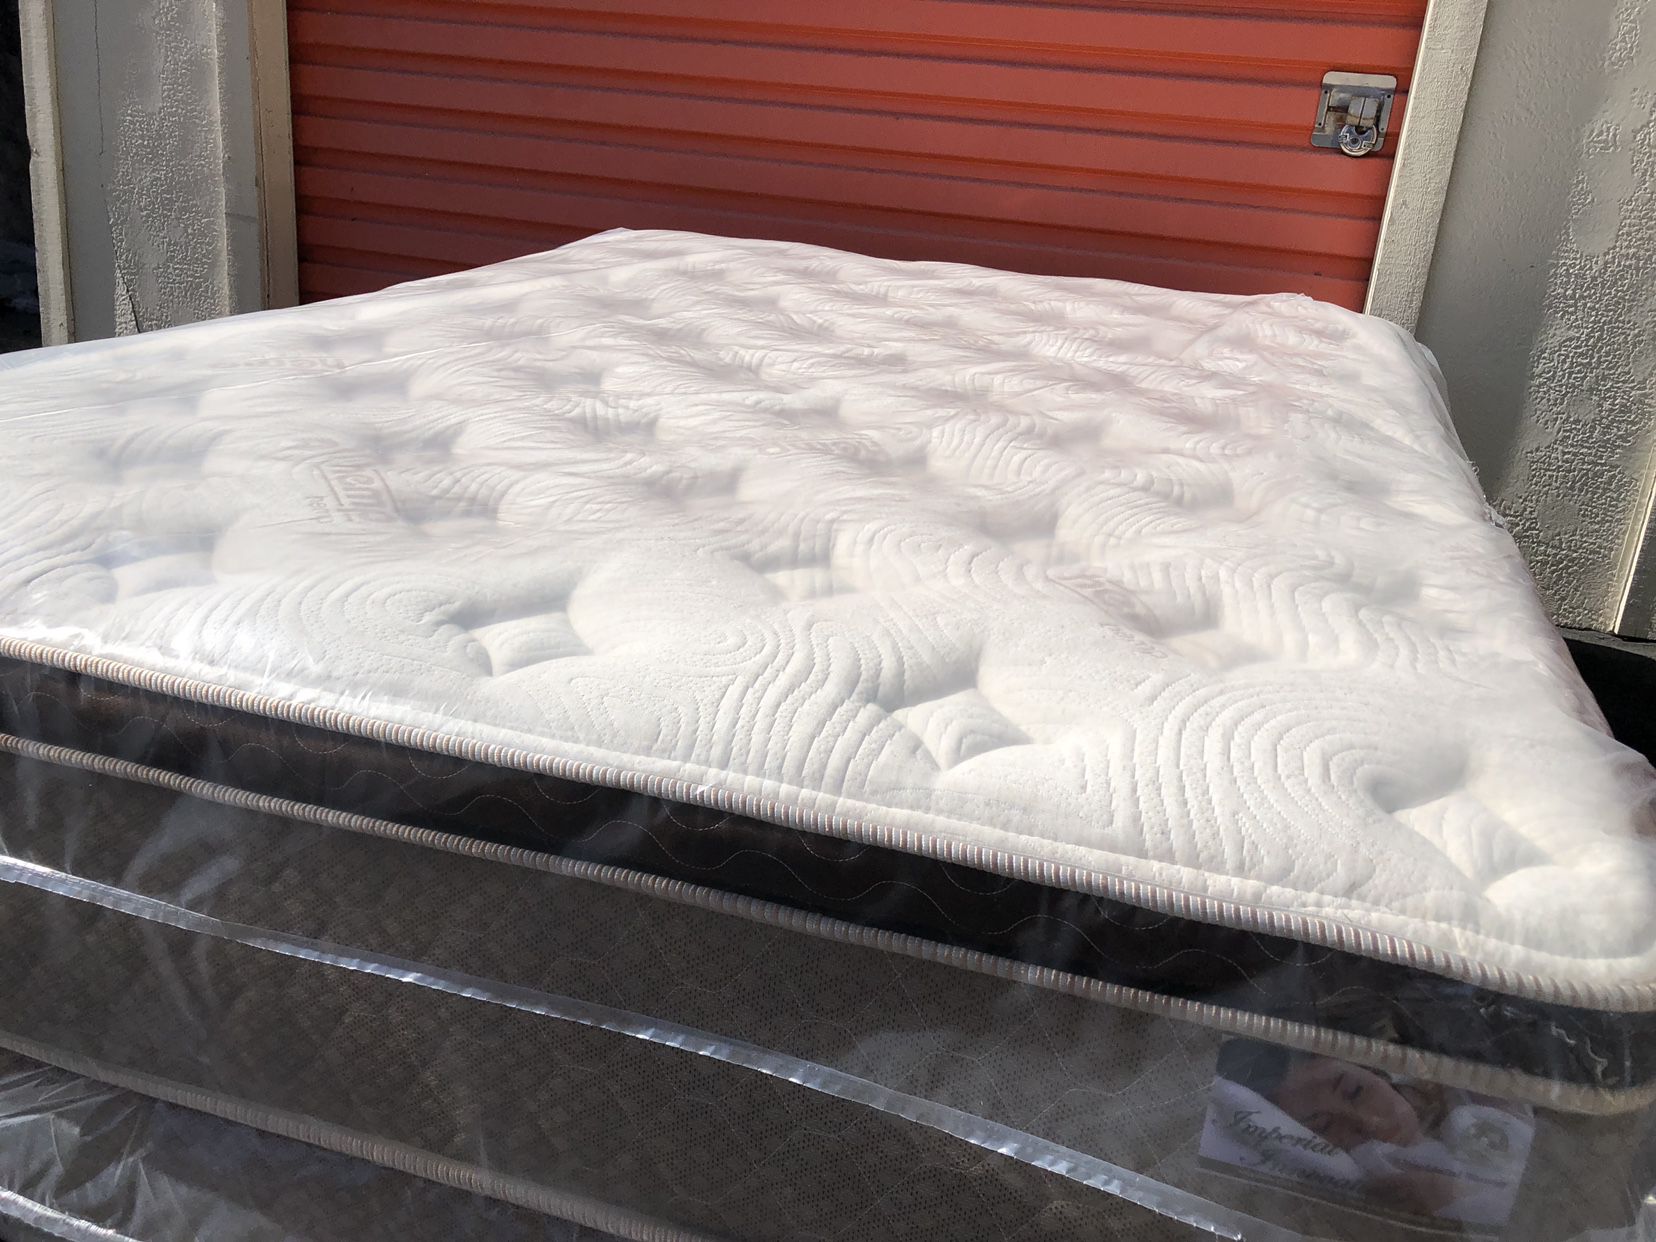 Brand New Pillow Top Cal King Mattress and Box Springs.Free Delivery